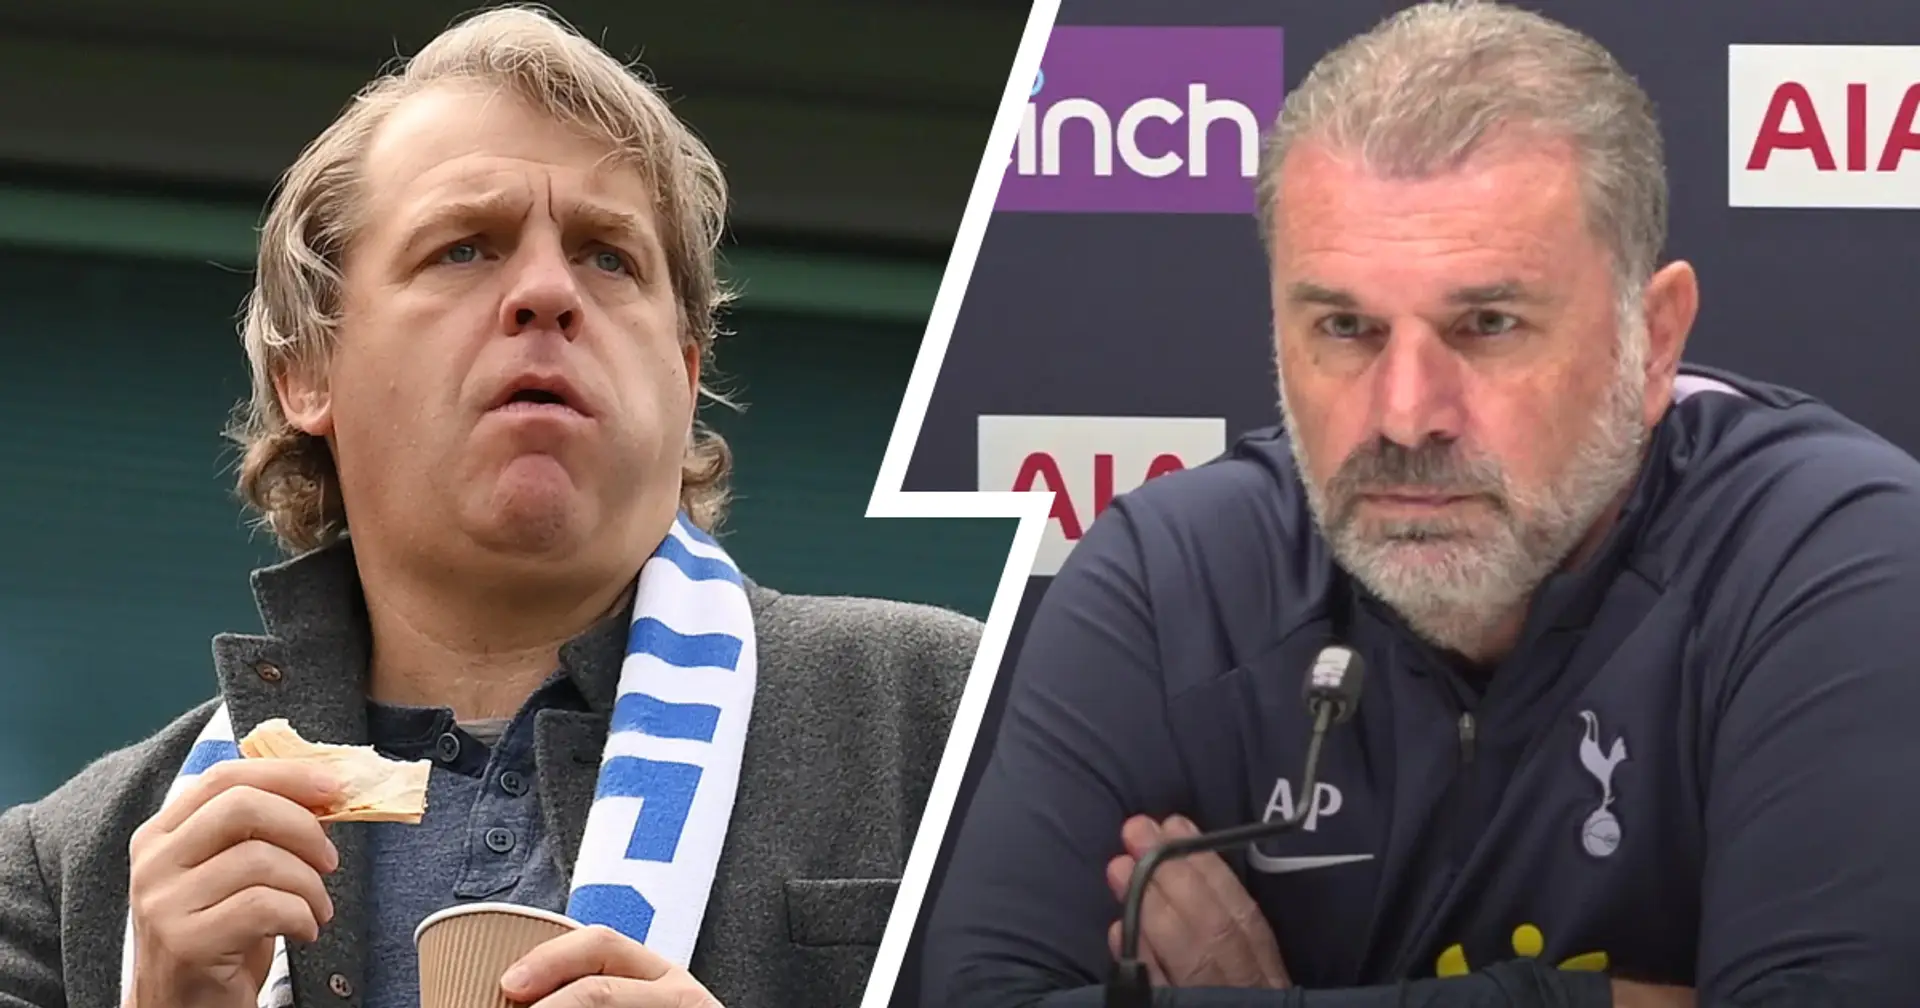 'That will never work': Ange Postecoglou questions Chelsea spending under new owners